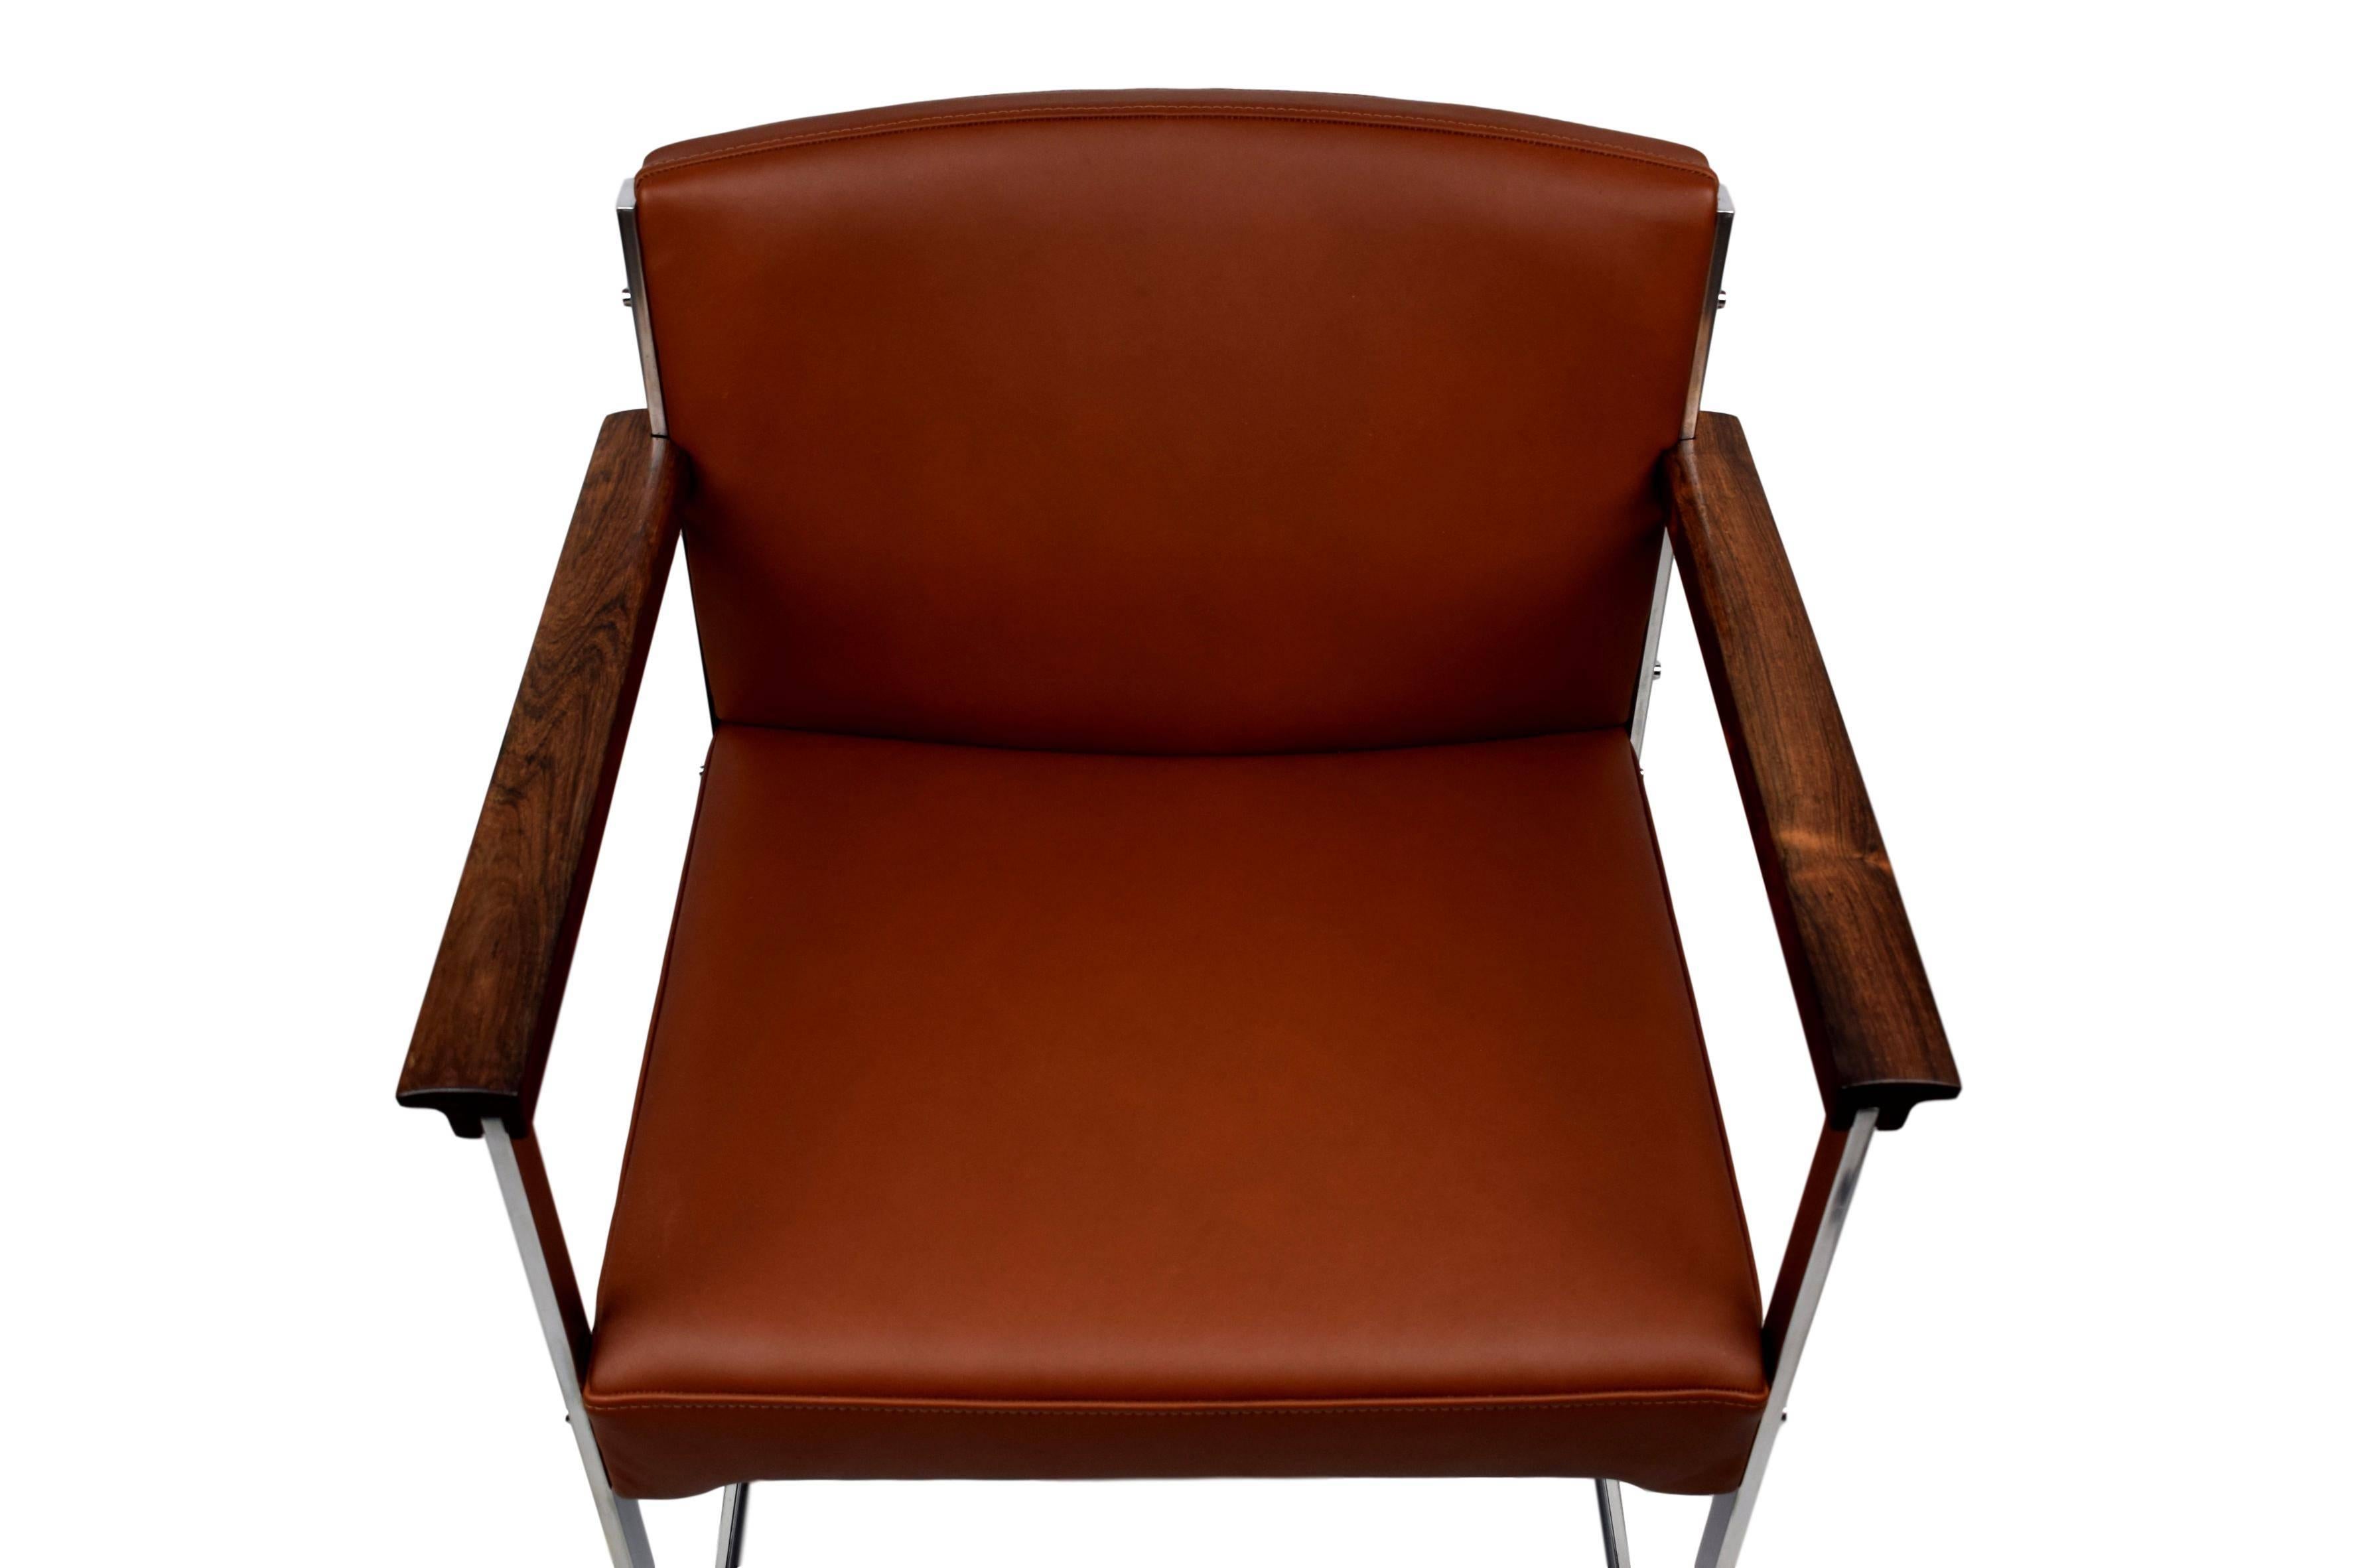 A Danish midcentury armchair by Illum Wikkelsø (1919-1999). Produced by P. Schultz & Co. Steel frame with solid rosewood armrests. Newly upholstered with brown aniline leather. New foam in the seat and backrest.

Multible chairs available. Please